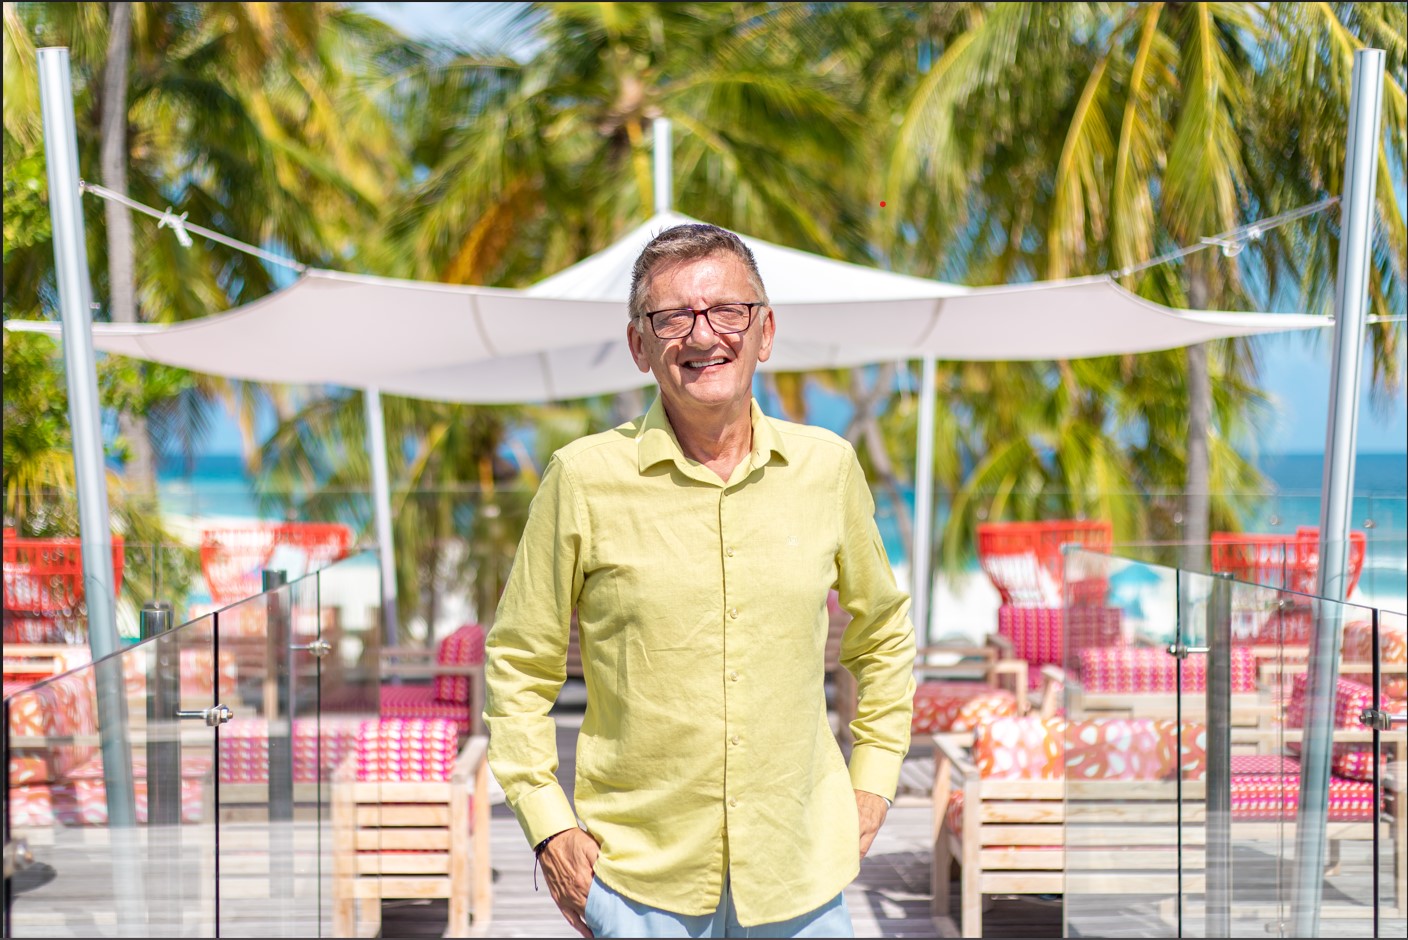 Steven Phillips has been appointed as the new General Manager of Seaside Finolhu Baa Atoll Maldives.